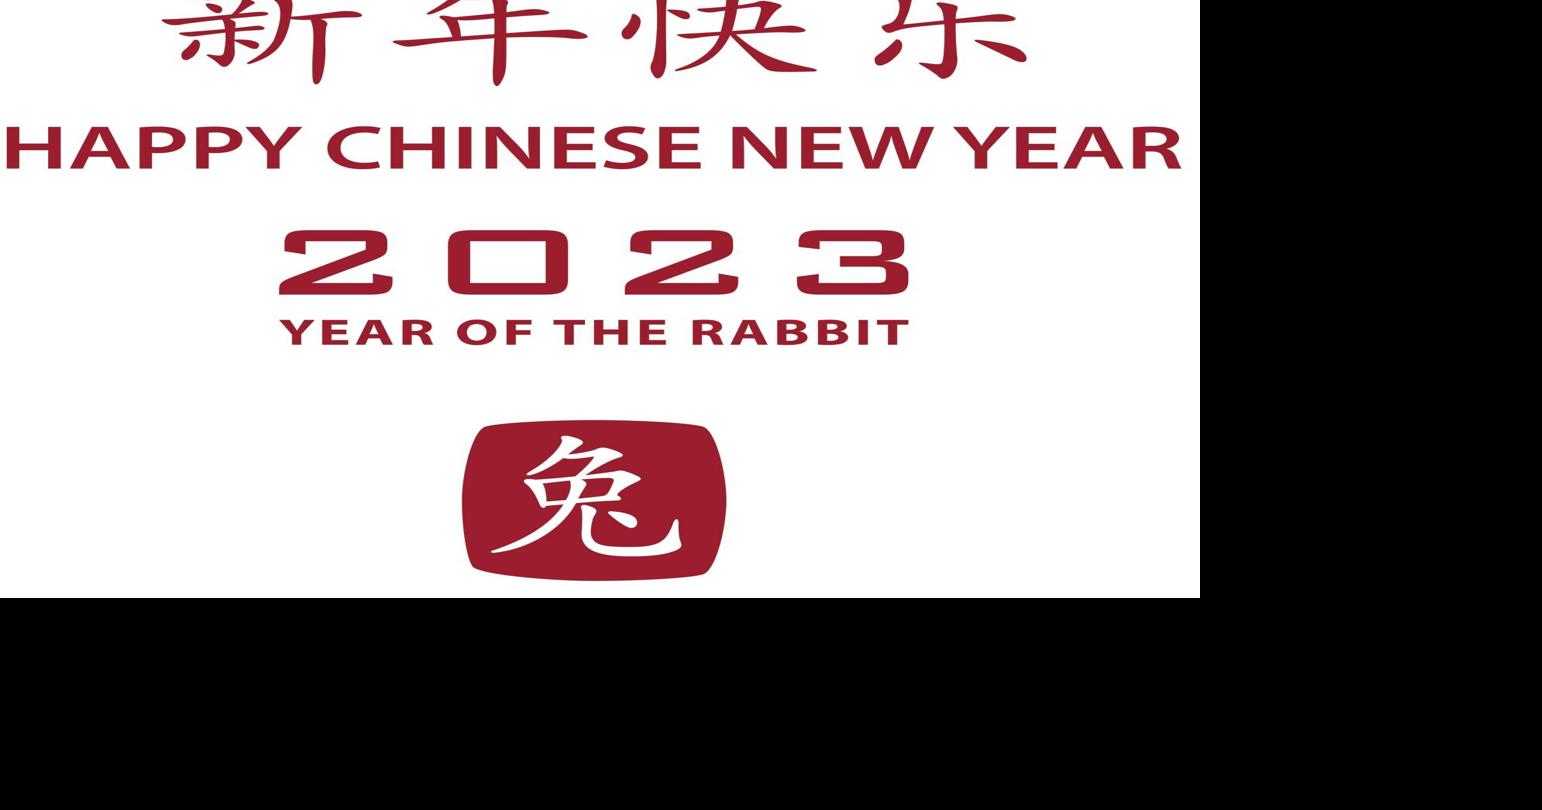 A Look Into Lunar New Year 2023, The Year of the Rabbit - Baker College